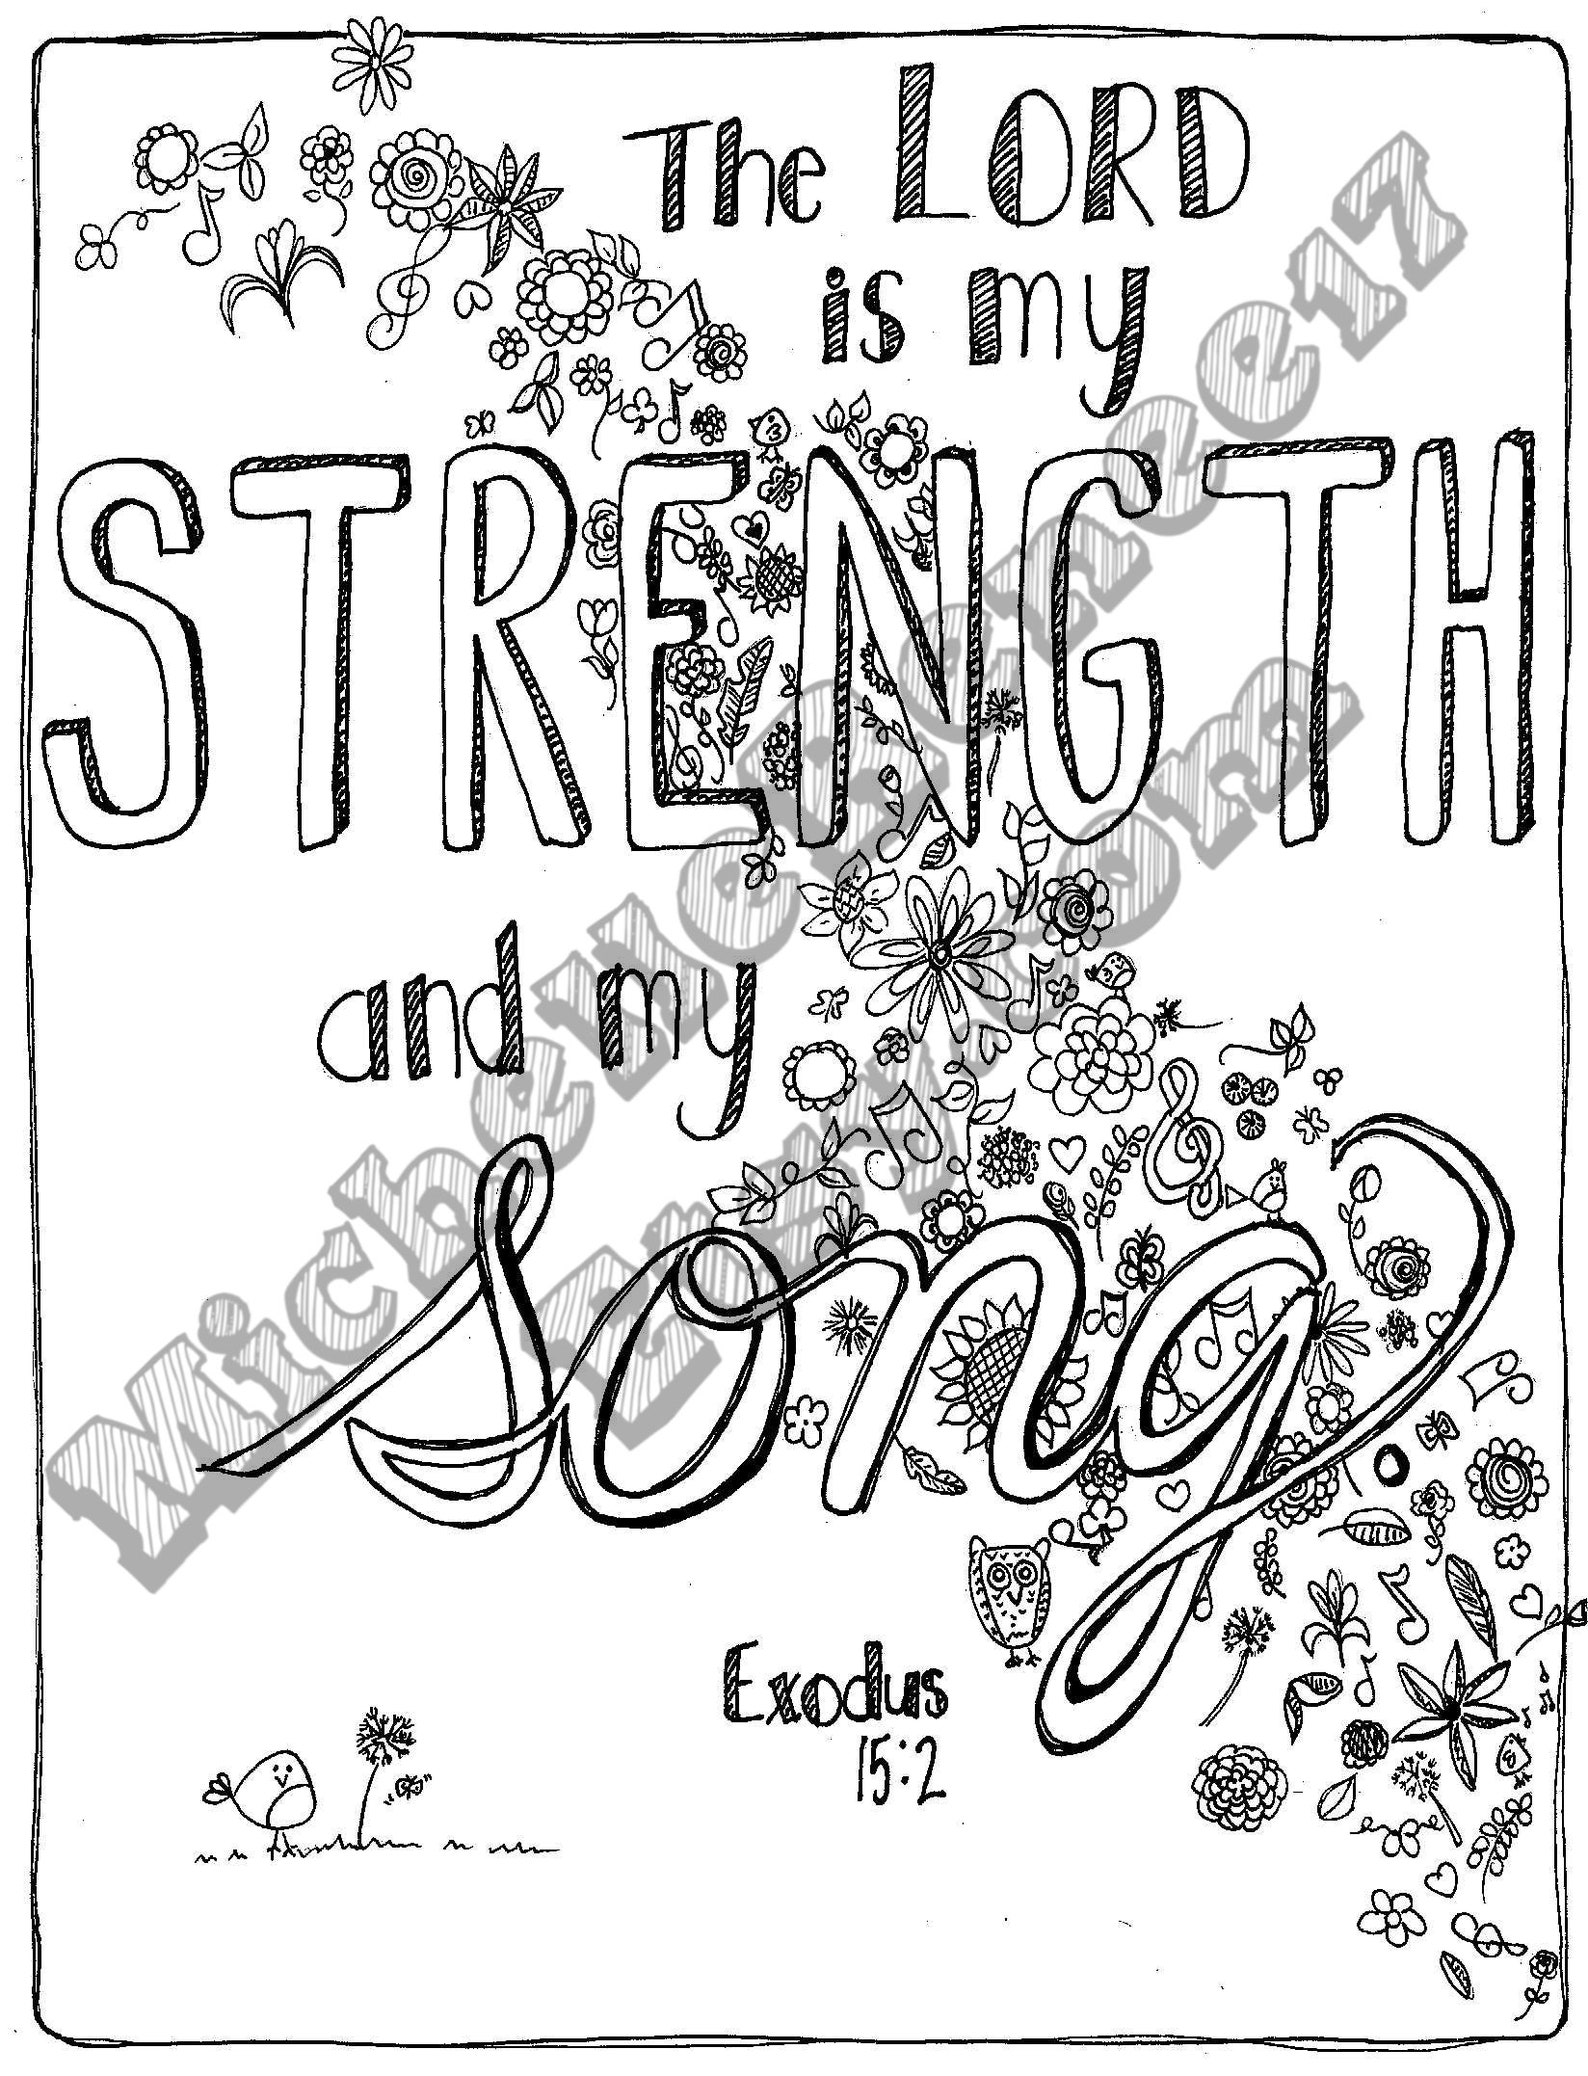 Bible Verse Coloring Page: Exodus 15.2 Digital Instant Download - Etsy